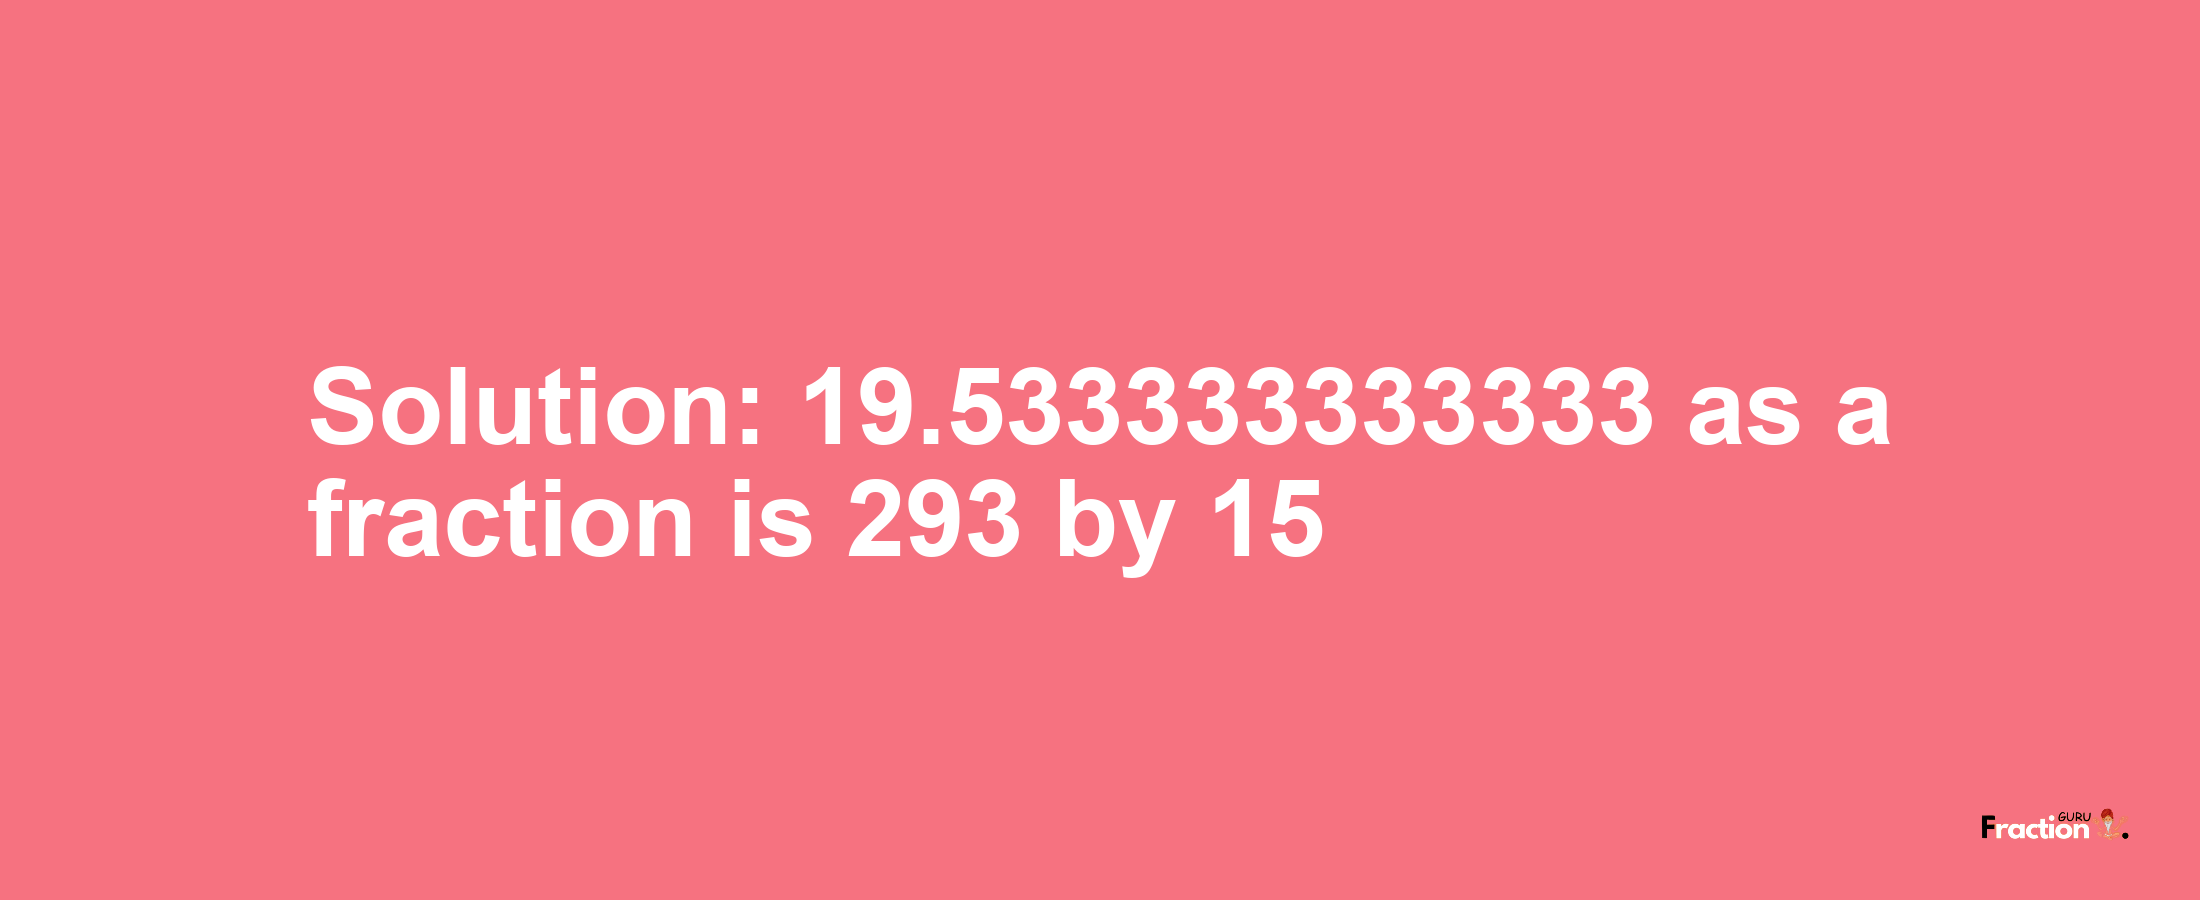 Solution:19.533333333333 as a fraction is 293/15